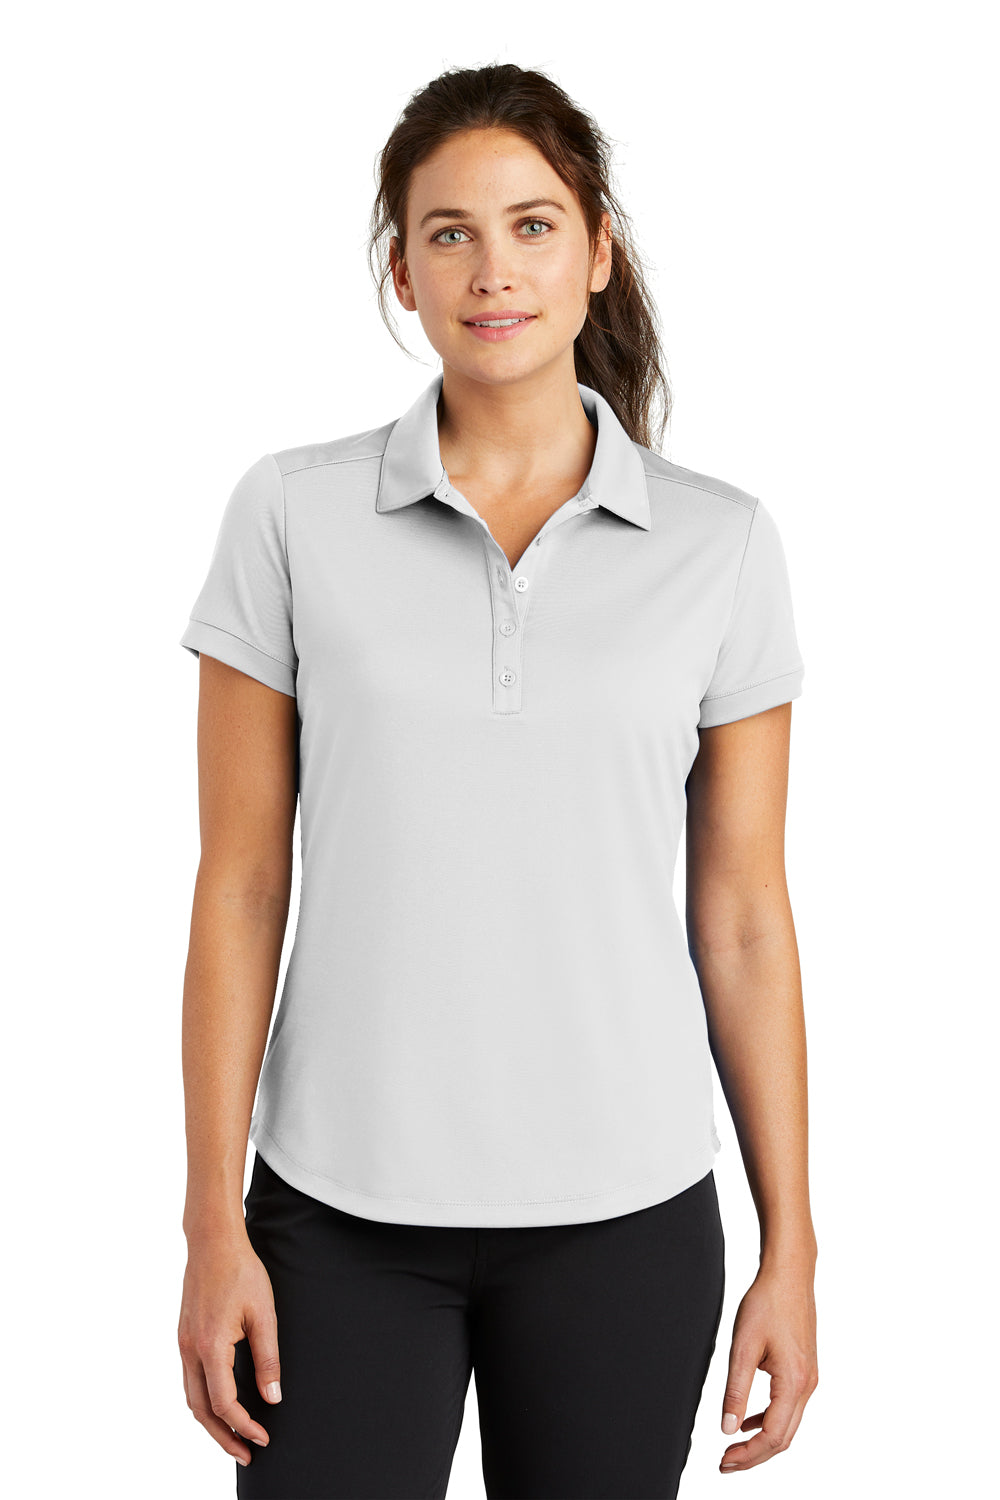 Nike 811807 Womens Players Dri-Fit Moisture Wicking Short Sleeve Polo Shirt White Model Front